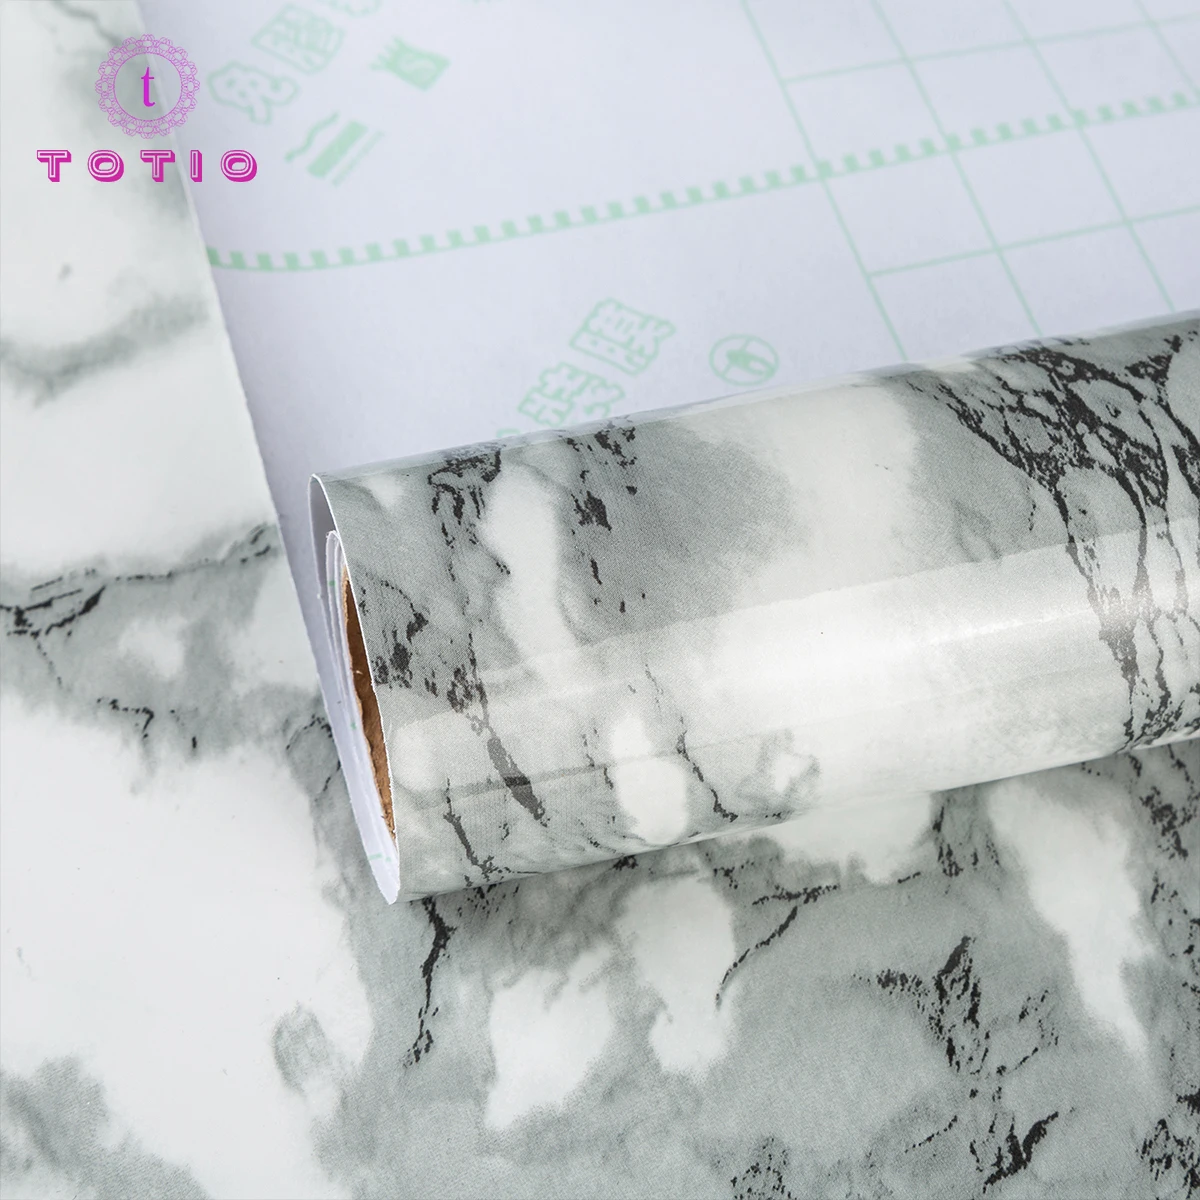 TOTIO White and Grey Marble Wallpaper Peel and Stick Waterproof Self Adhesive Vinyl Paper for Furniture Bedroom Living Room Wall